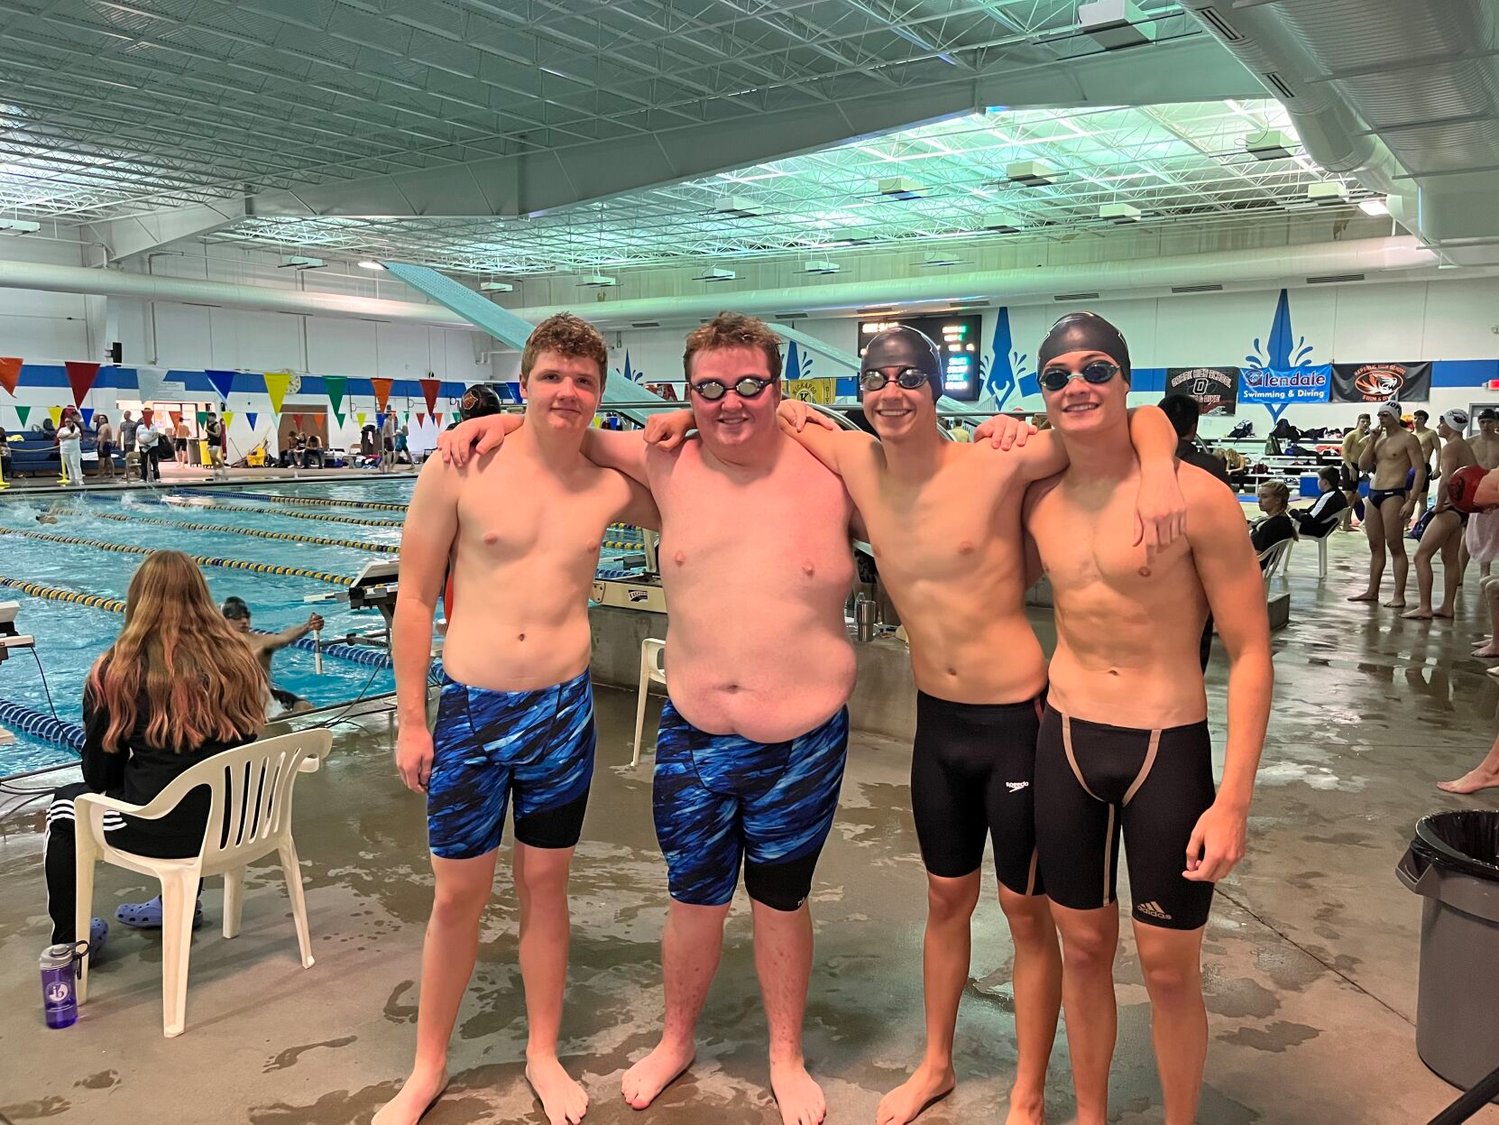 The 200 Relay team competed in Finals. (Ethan Rockwood, Hayden Davis, Wyatt Davis and Preston Dotson) however fell just short of moving on to the state competition. However, despite the loss, the team sealed their final PR as a team at the Southwest Missouri meet.